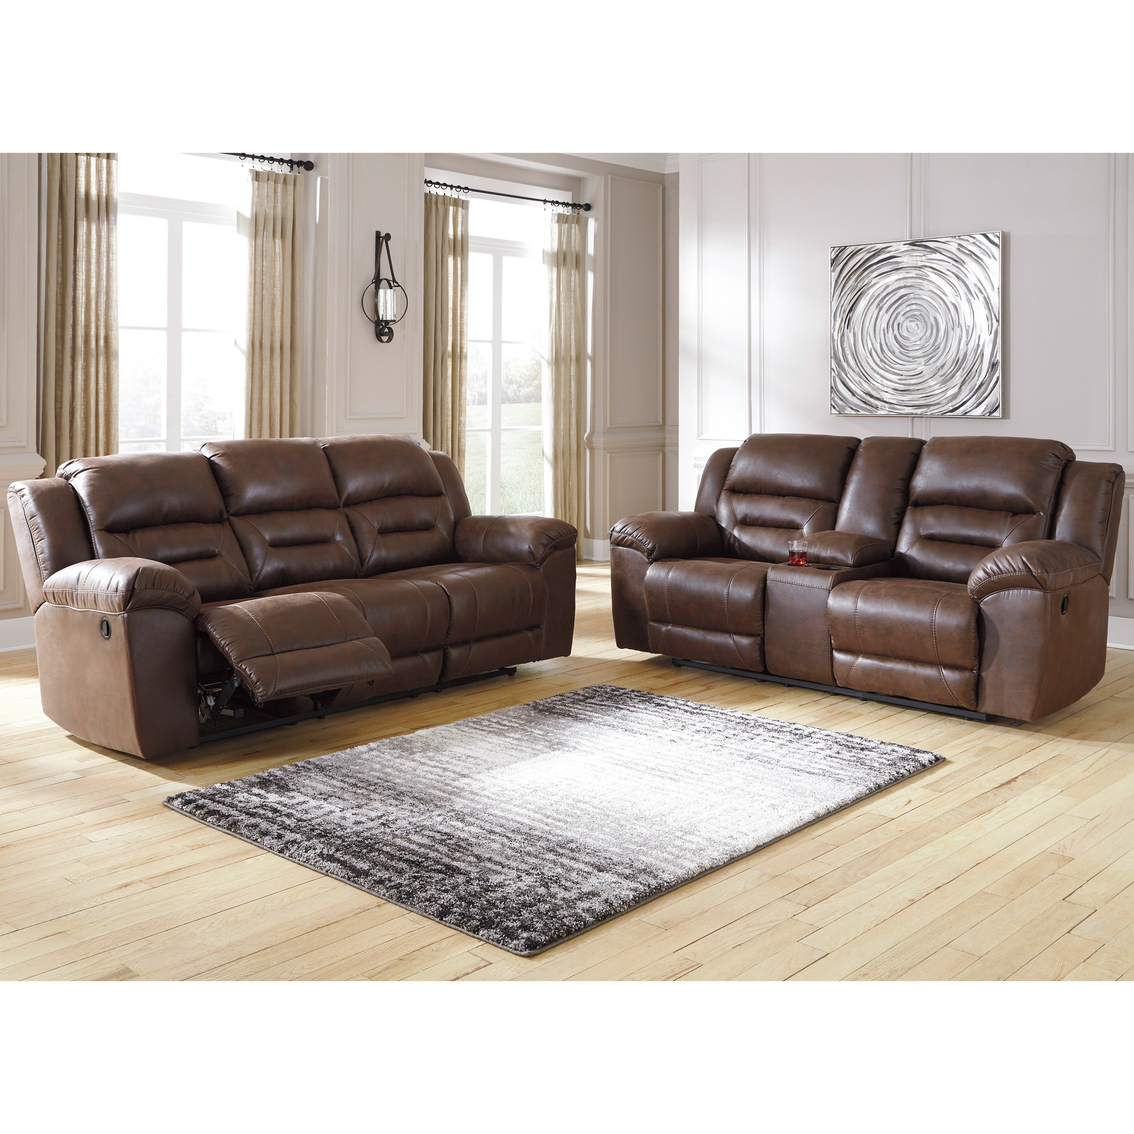 Signature Design by Ashley Stoneland Double Reclining Loveseat with Console - Image 2 of 2